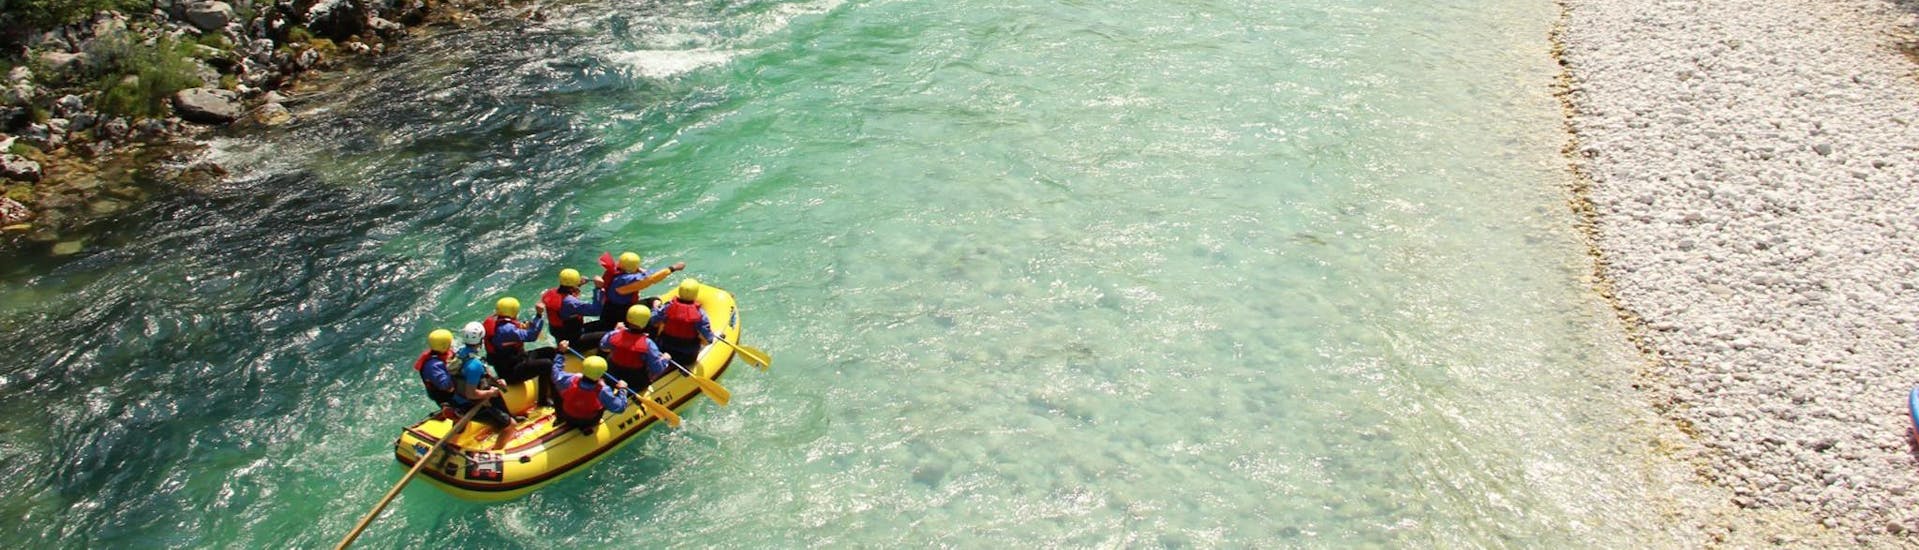 A group of participants will go whitewater rafting on a calm passage in the Soča Valley - standard tour with TOP Rafting Centre.